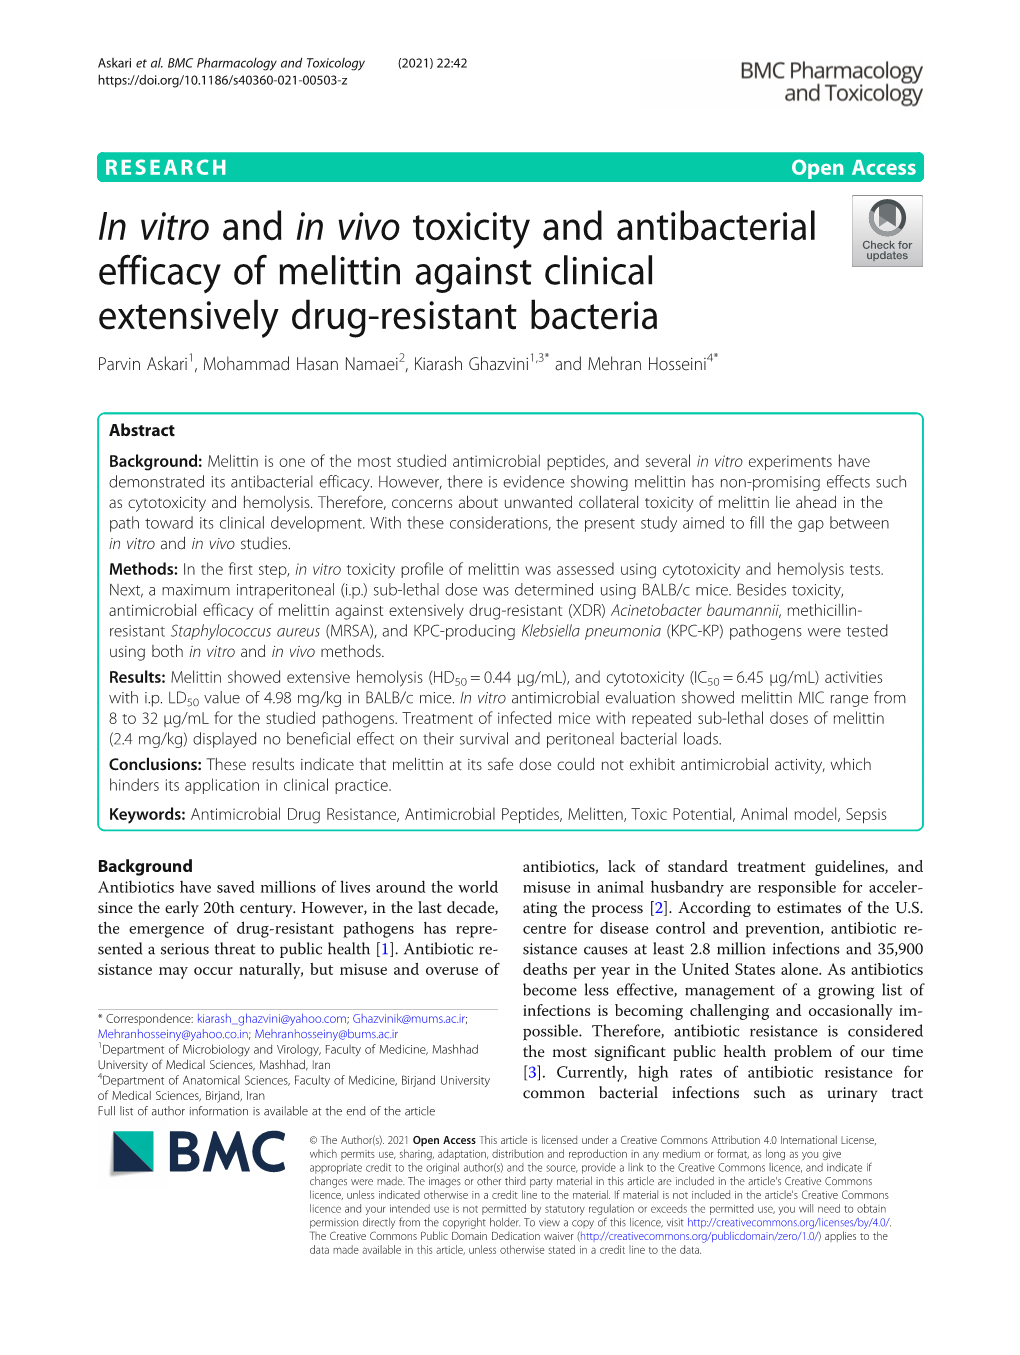 In Vitro and in Vivo Toxicity and Antibacterial Efficacy of Melittin